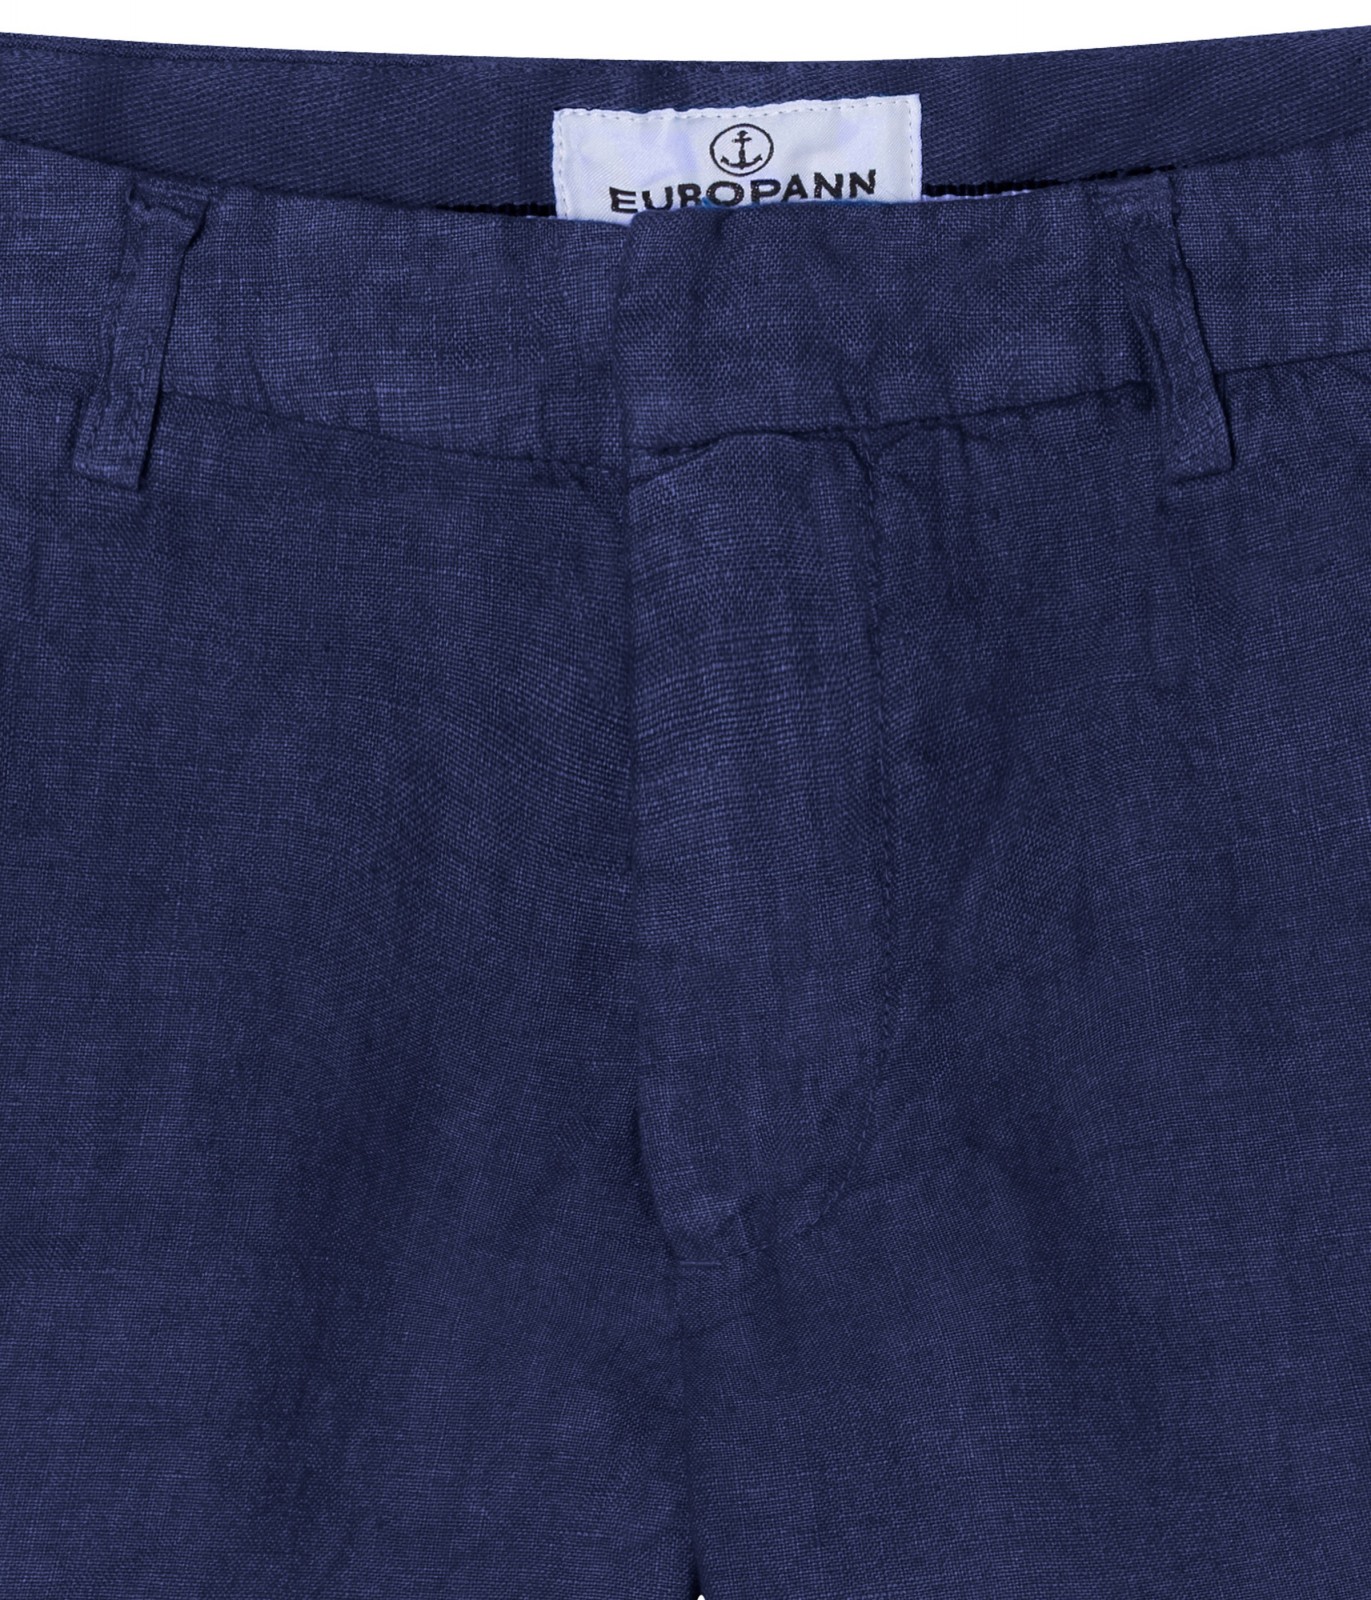 Casual linen bermudas for mens with regular fit